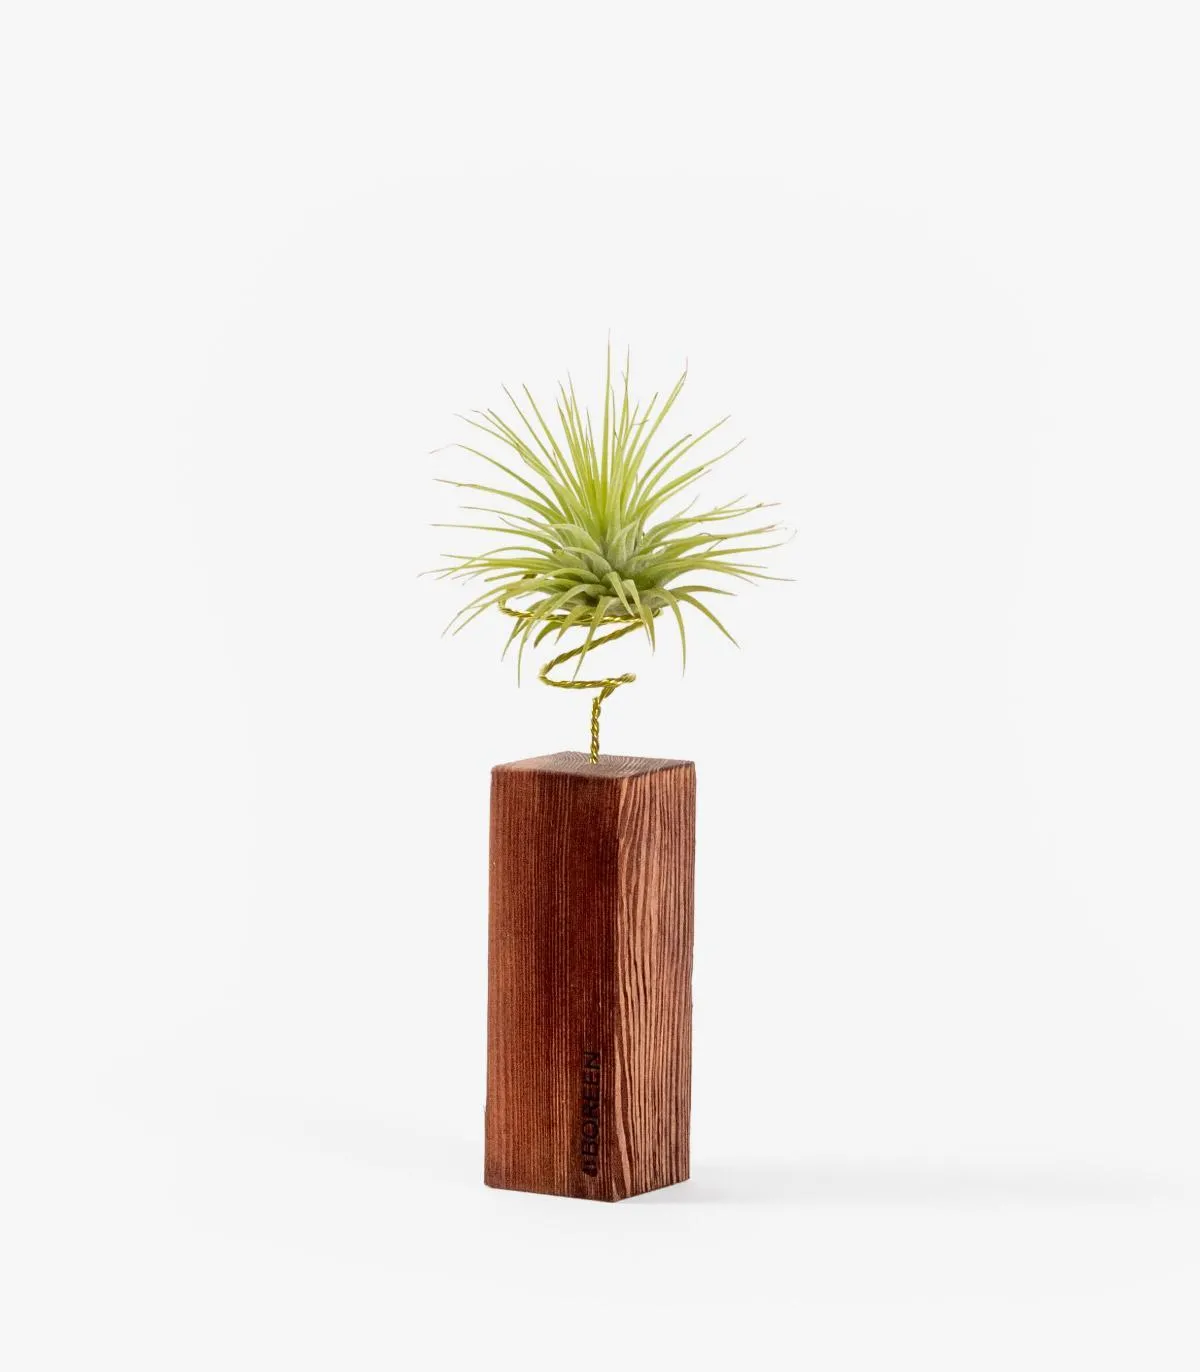 Wooden strip 10cm and Scap plant